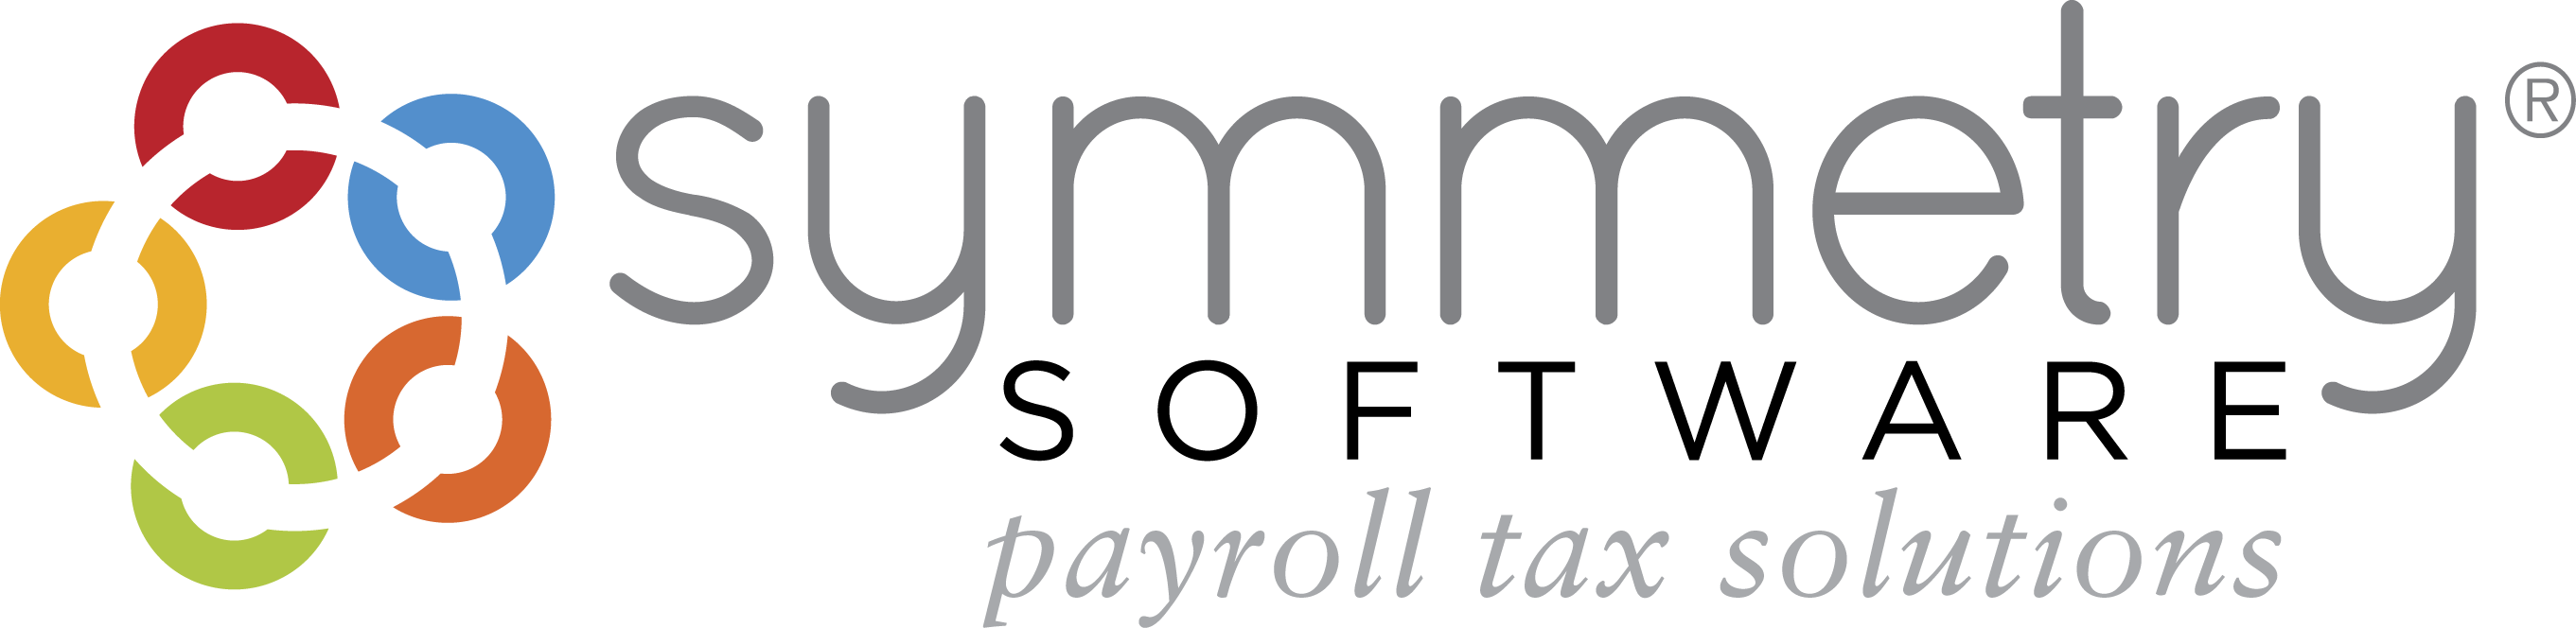 Symmetry Software, specialists in payroll withholding tax solutions for the internet and corporate intranet.